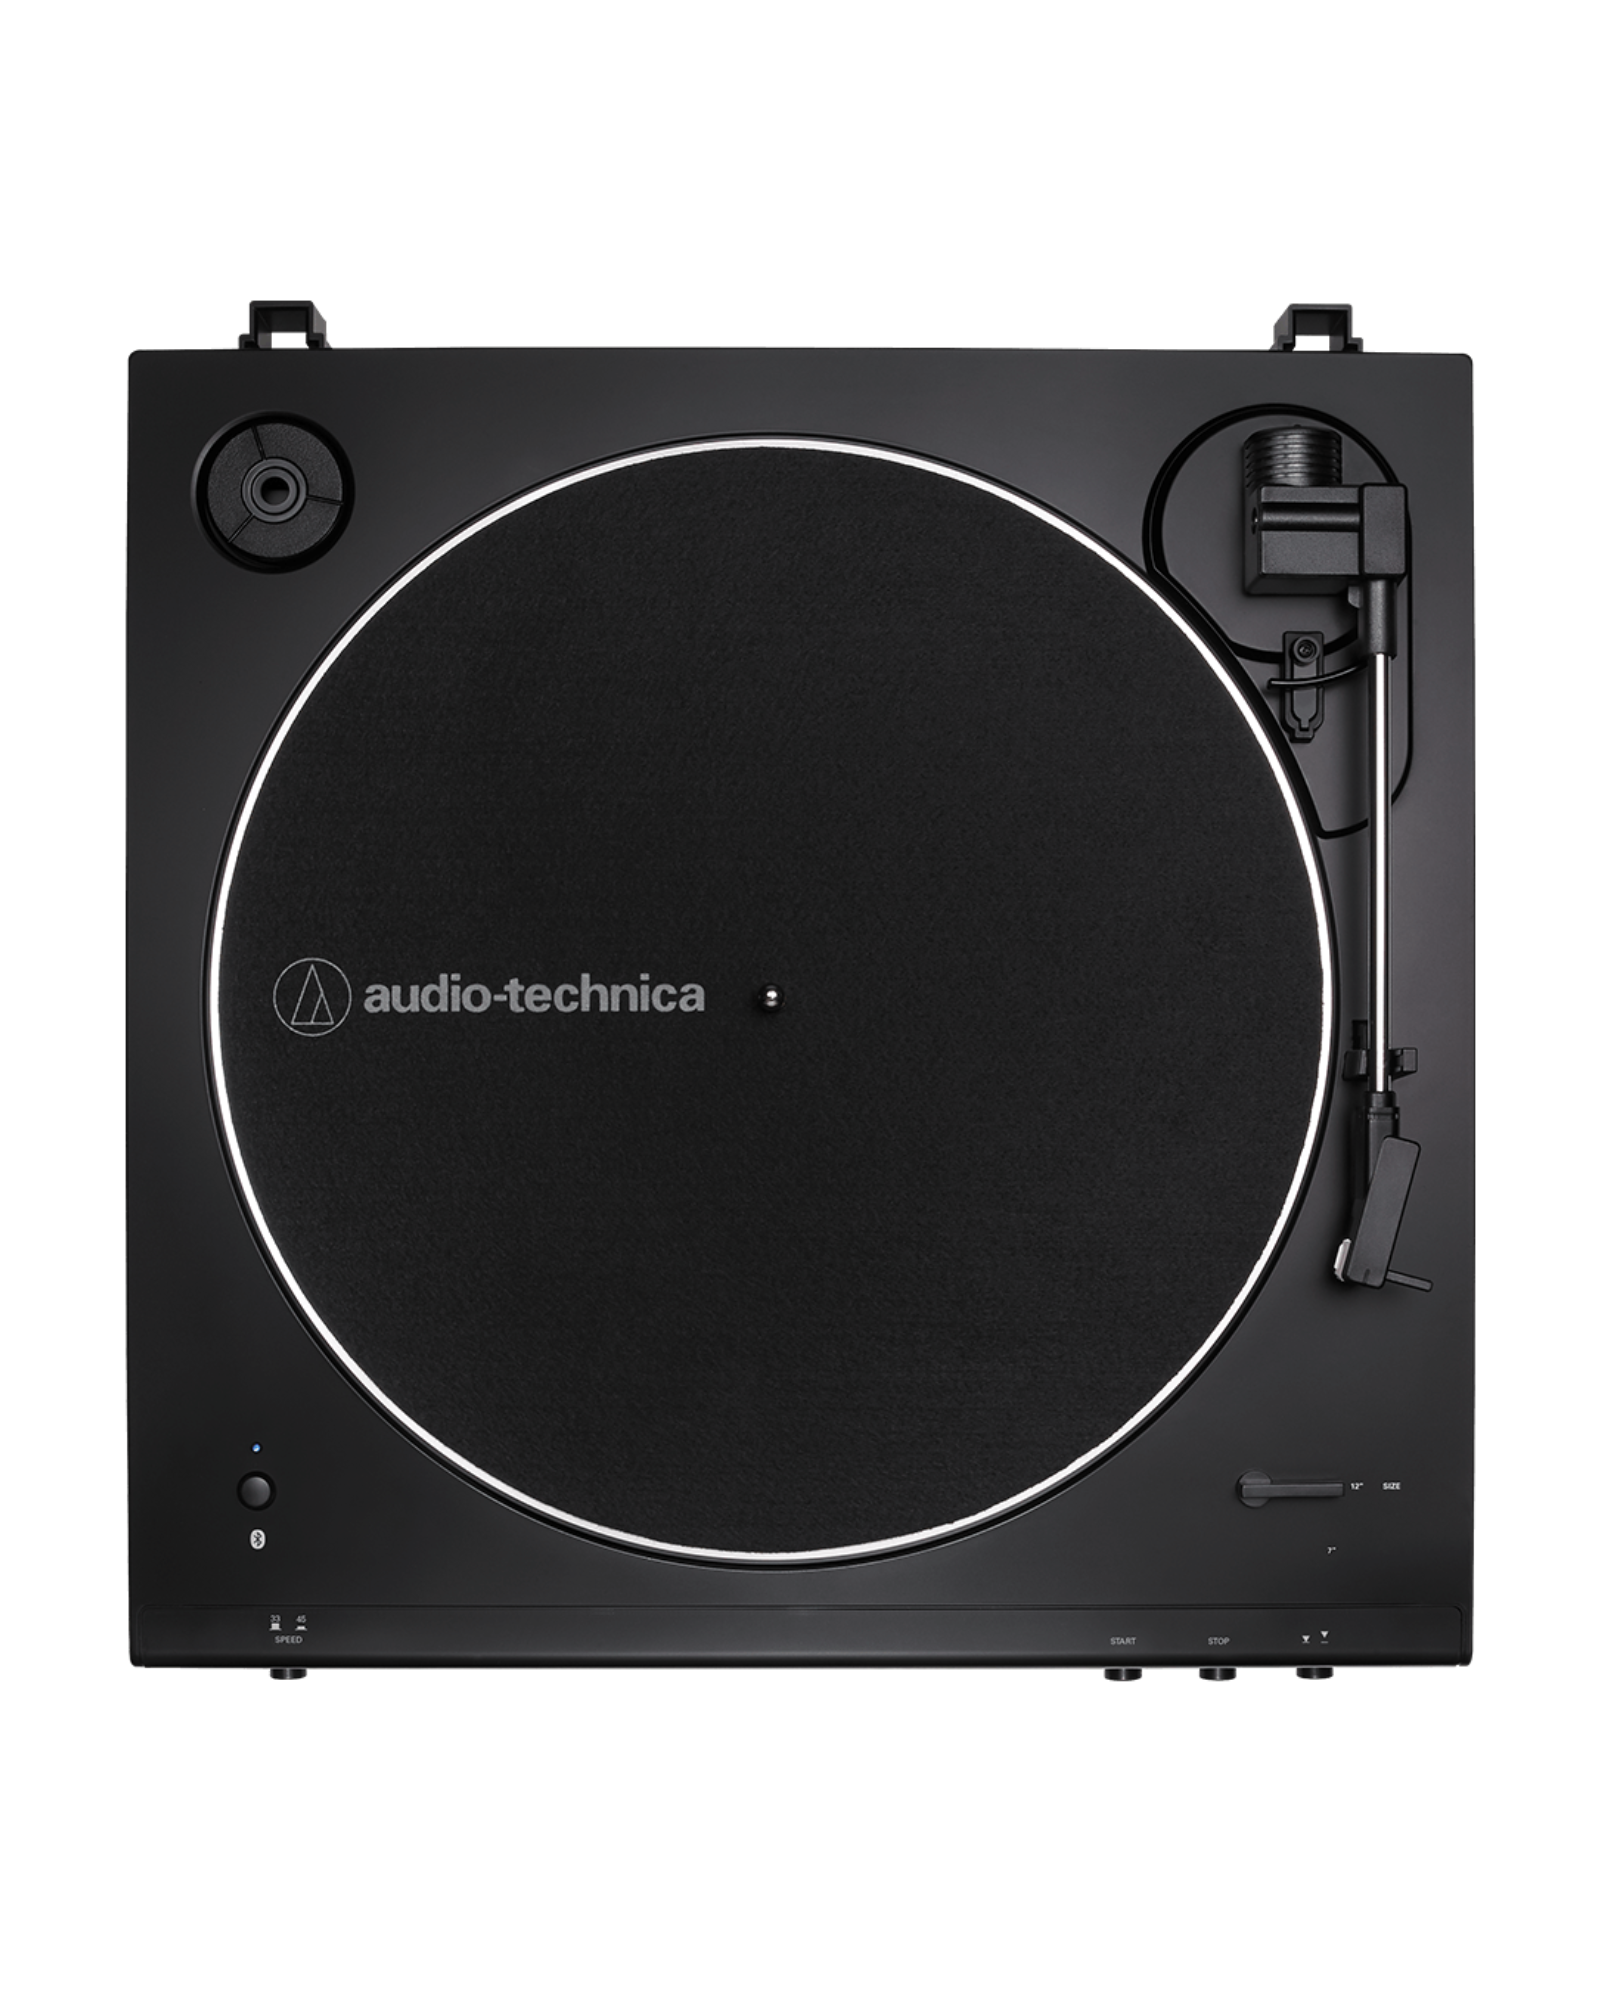 FULLY AUTOMATIC WIRELESS BELT-DRIVE TURNTABLE